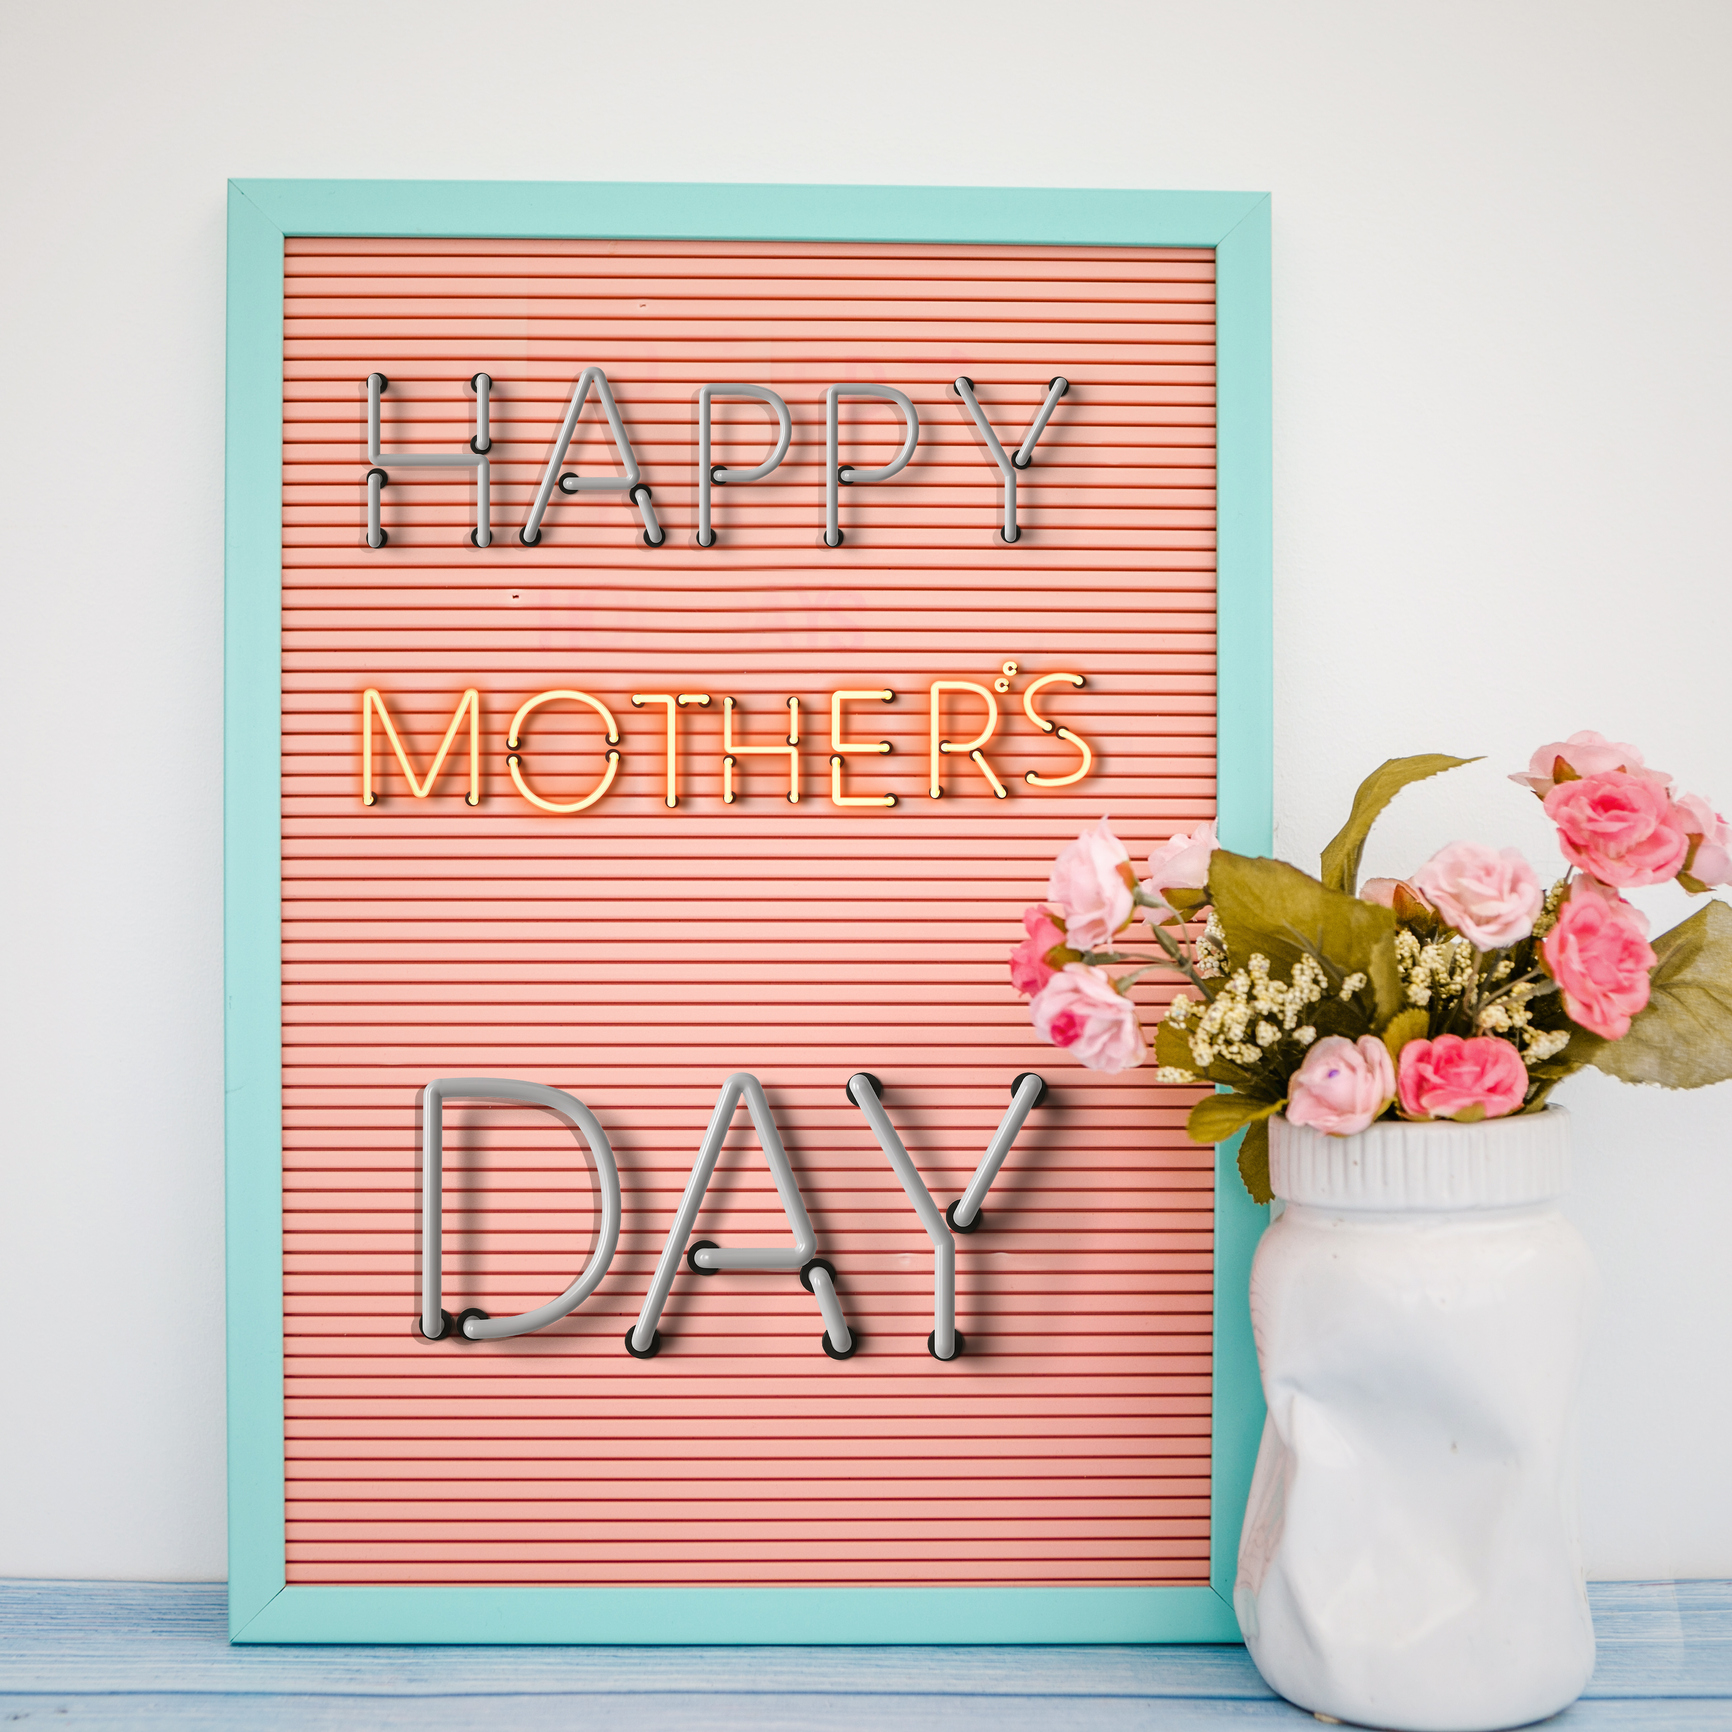 Fun and frugal Mother's Day gift ideas